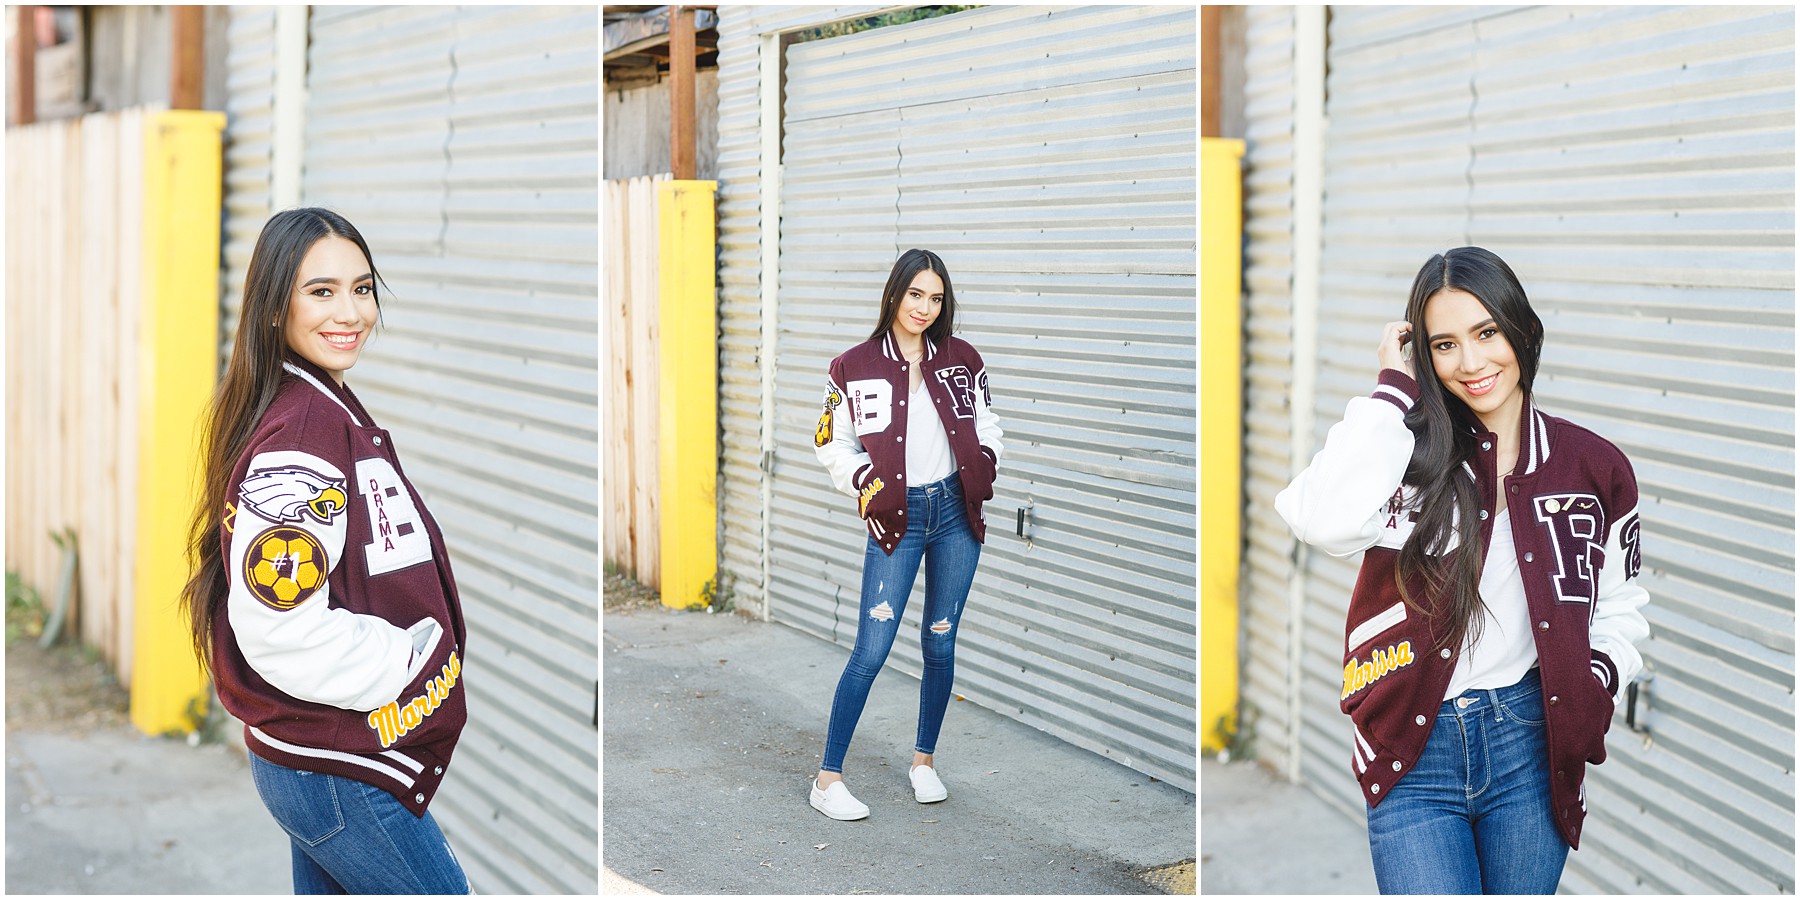 letterman jacket outfit ideas for tara rochelle senior pictures